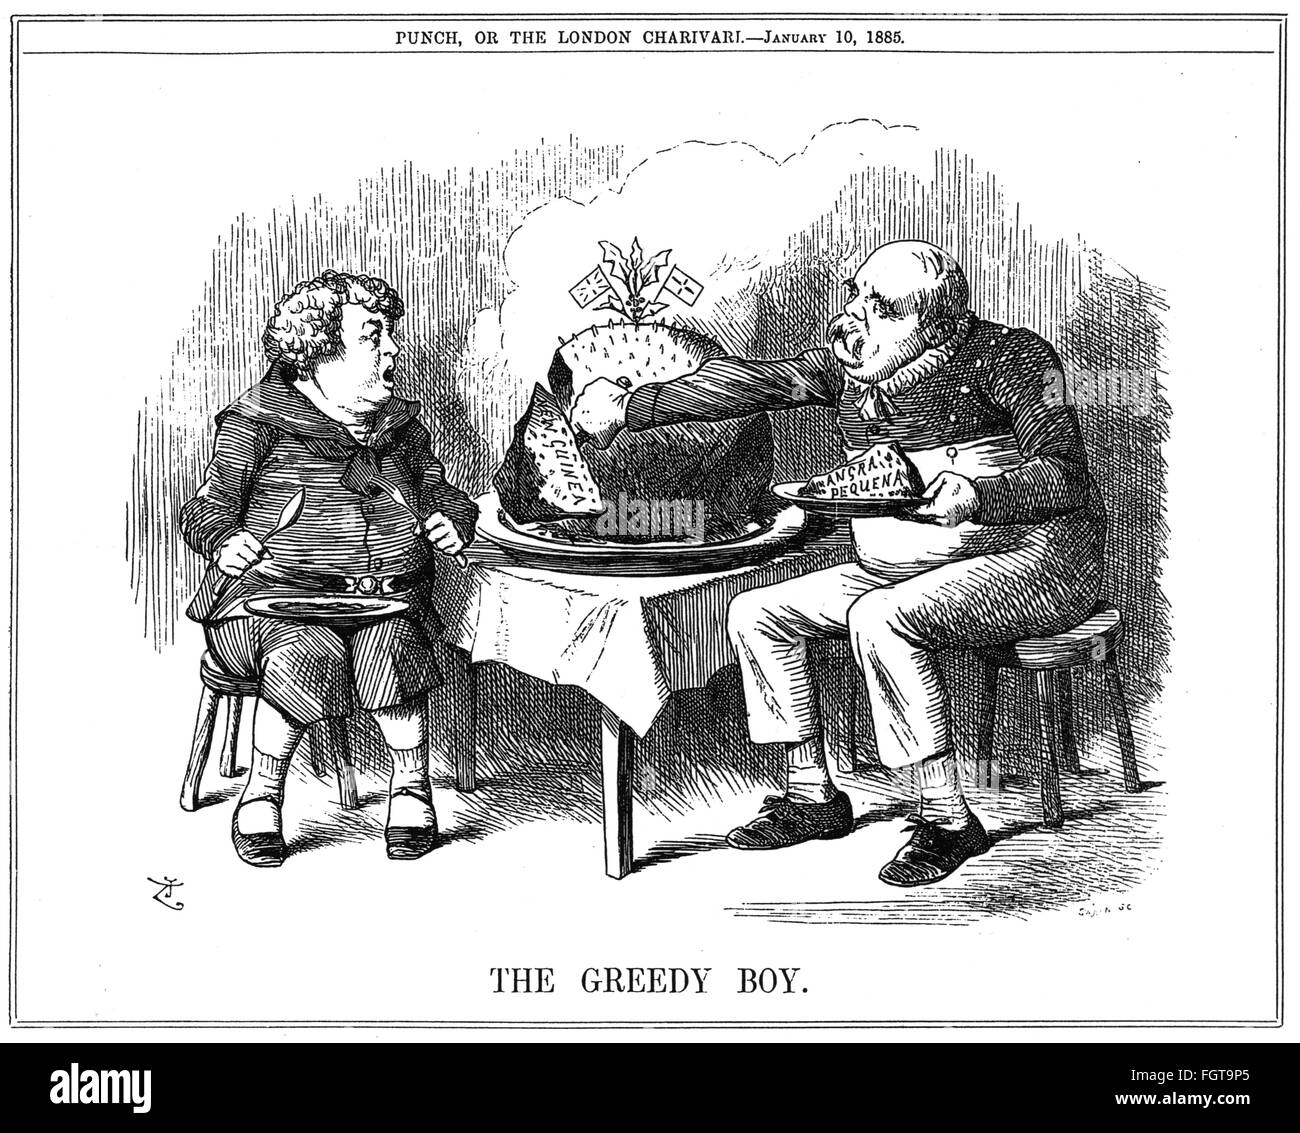 politics, colonial policy, caricature, Bismarck is cutting off a further piece of the big cake, John Bull is watching startled, 'The greedy boy', drawing, 'Punch', London, 10.1.1885, Additional-Rights-Clearences-Not Available Stock Photo